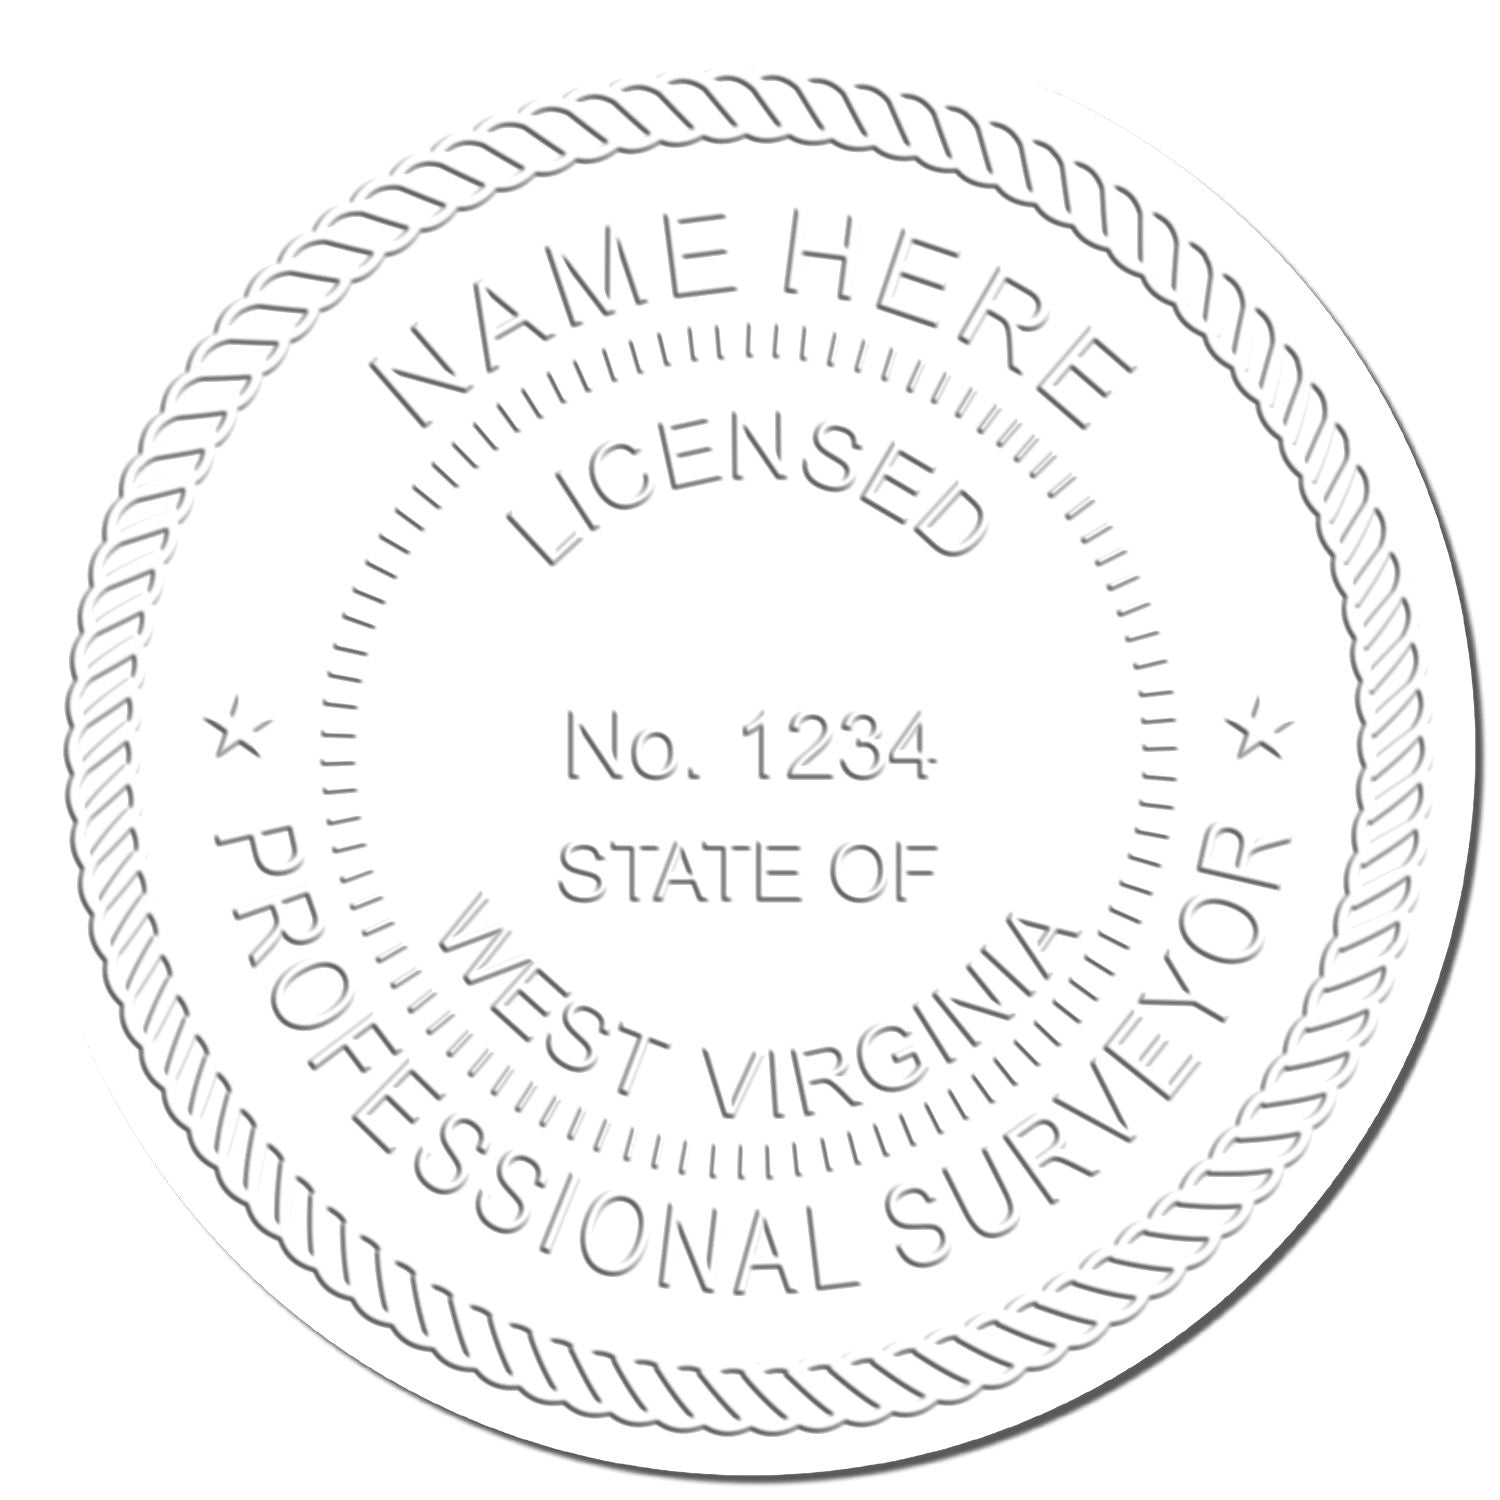 This paper is stamped with a sample imprint of the Long Reach West Virginia Land Surveyor Seal, signifying its quality and reliability.